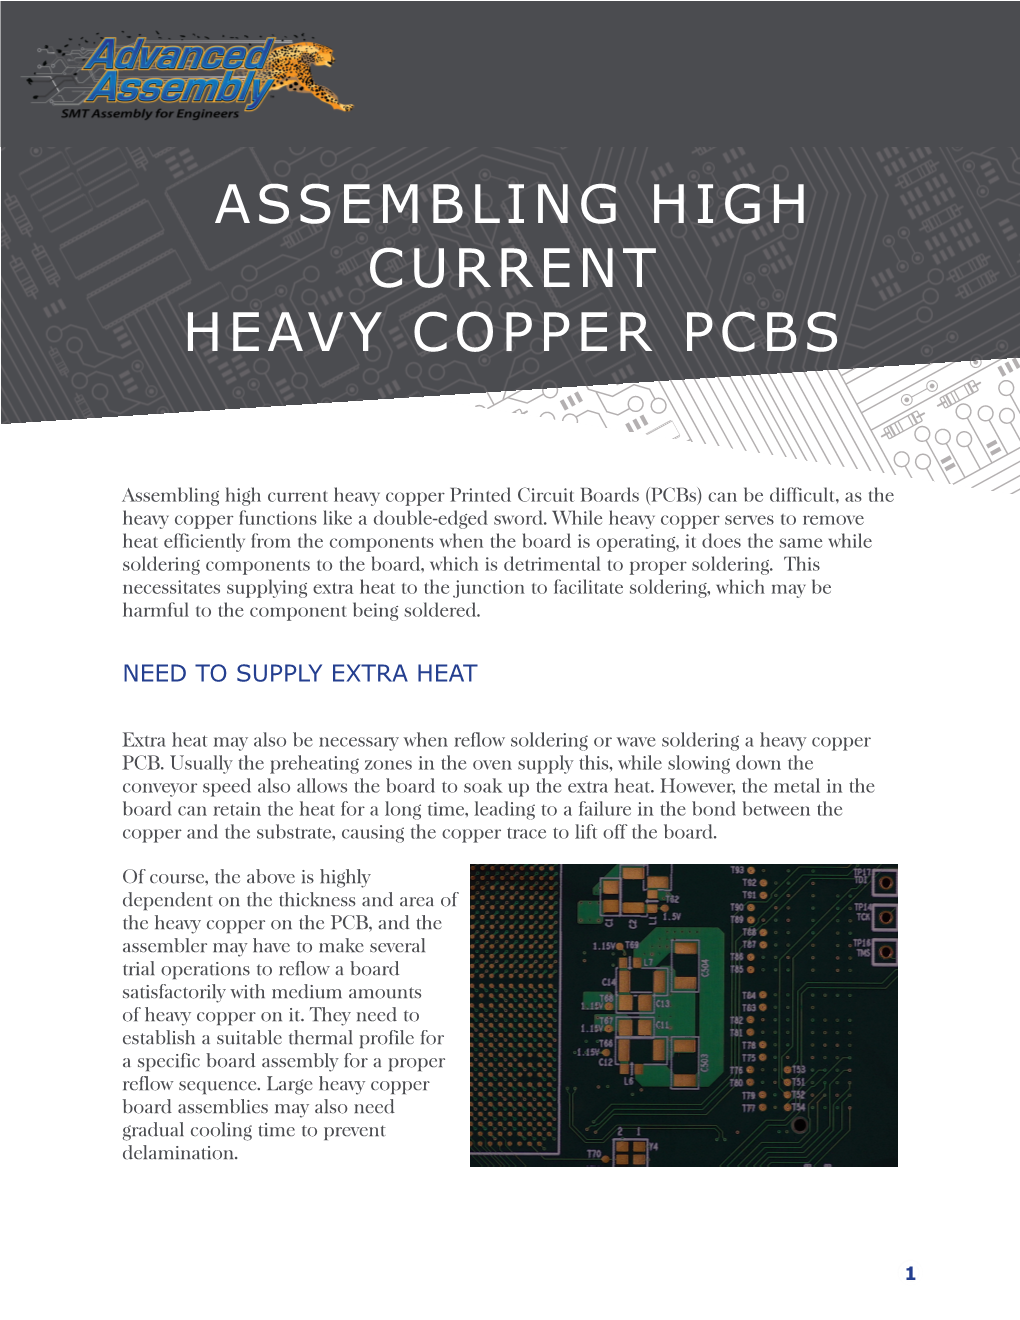 Assembling High Current Heavy Copper Pcbs